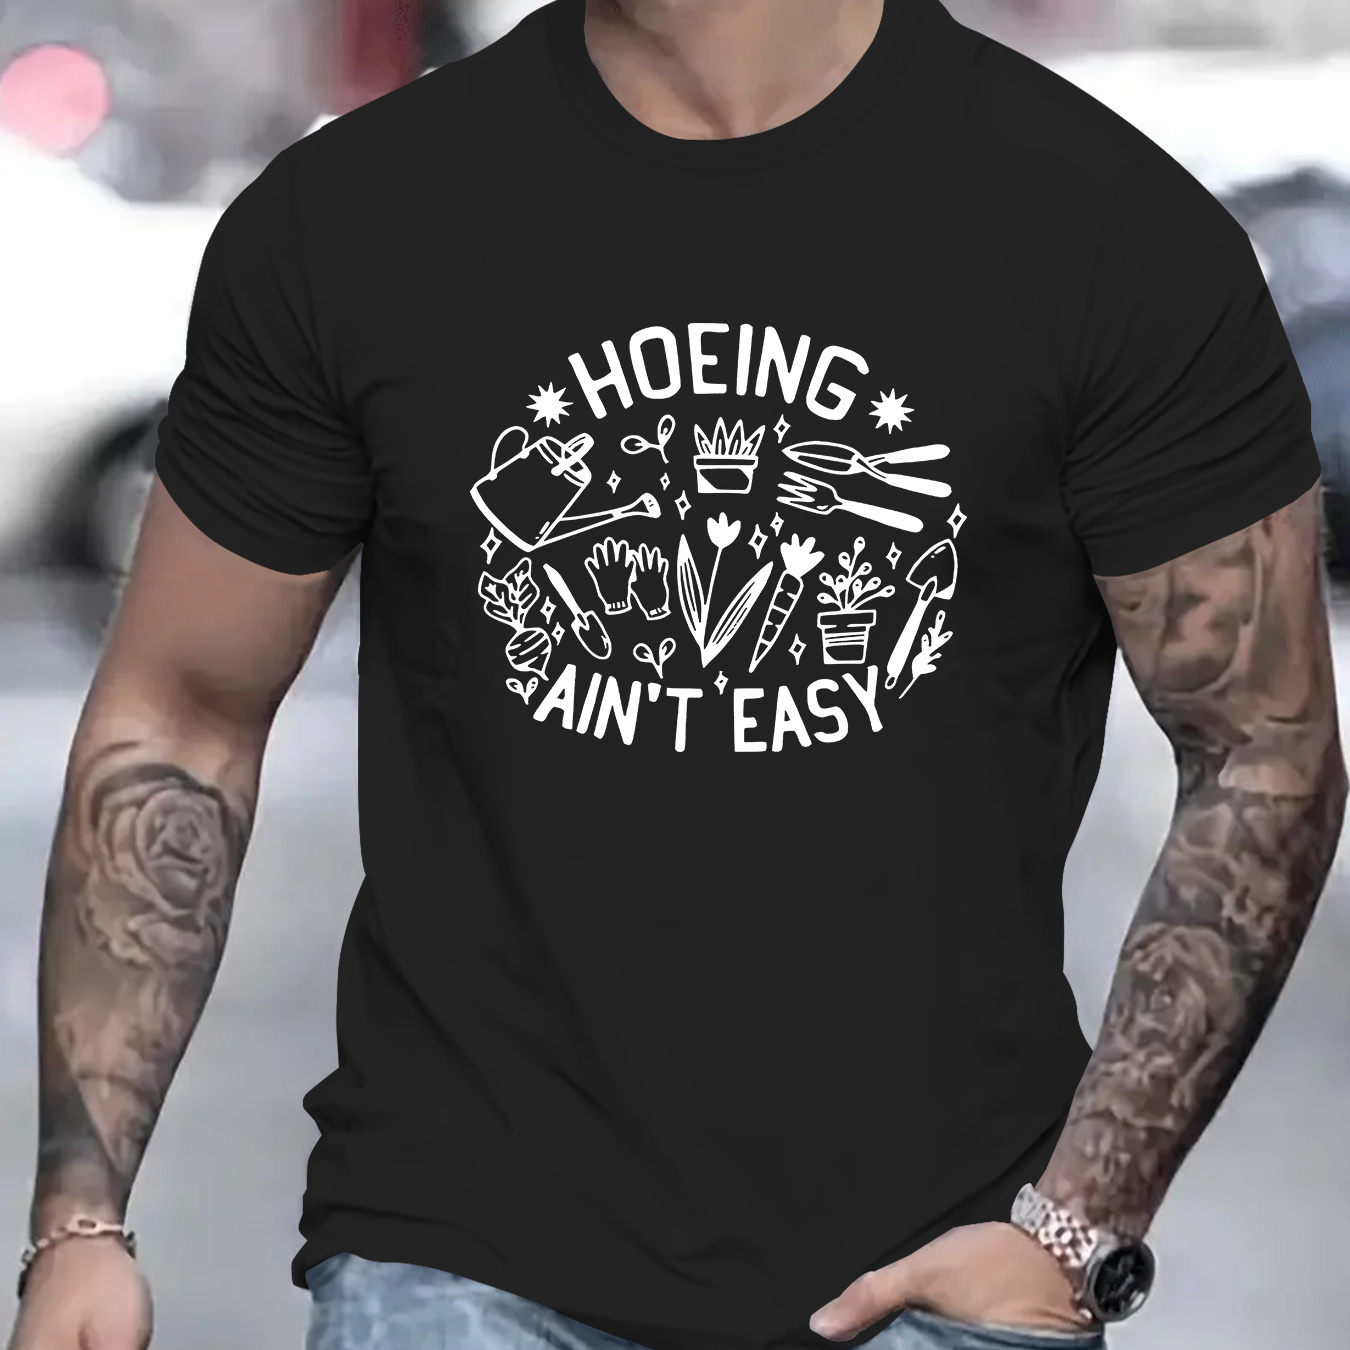 

Men's Casual Fashion Short Sleeve T-shirt, Versatile Fashion Crew Neck Tee, Trendy Streetwear With Stylish " Hoeing Ain't Easy "print